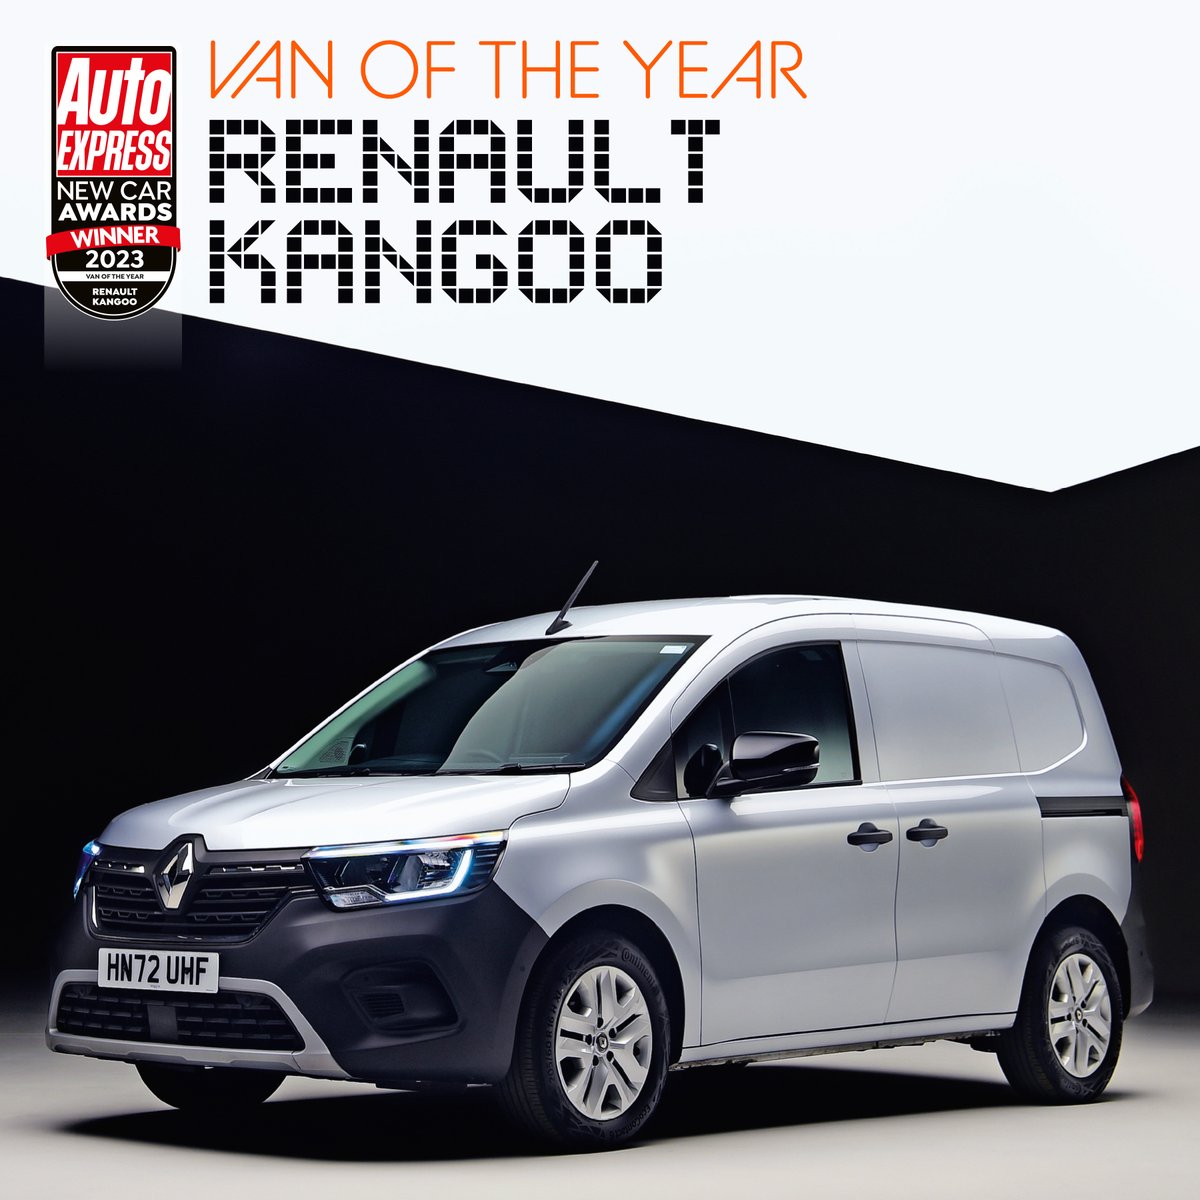 “The arrival of the all-new Renault Kangoo was worth the wait, because it improves on its predecessor in every conceivable area.”

✅ Good load bay access
✅ Efficient engines
✅ Clever details

autoexpress.co.uk/renault/kangoo…

@renault @renault_uk @RenaultUKPR #AEAwards #Renault